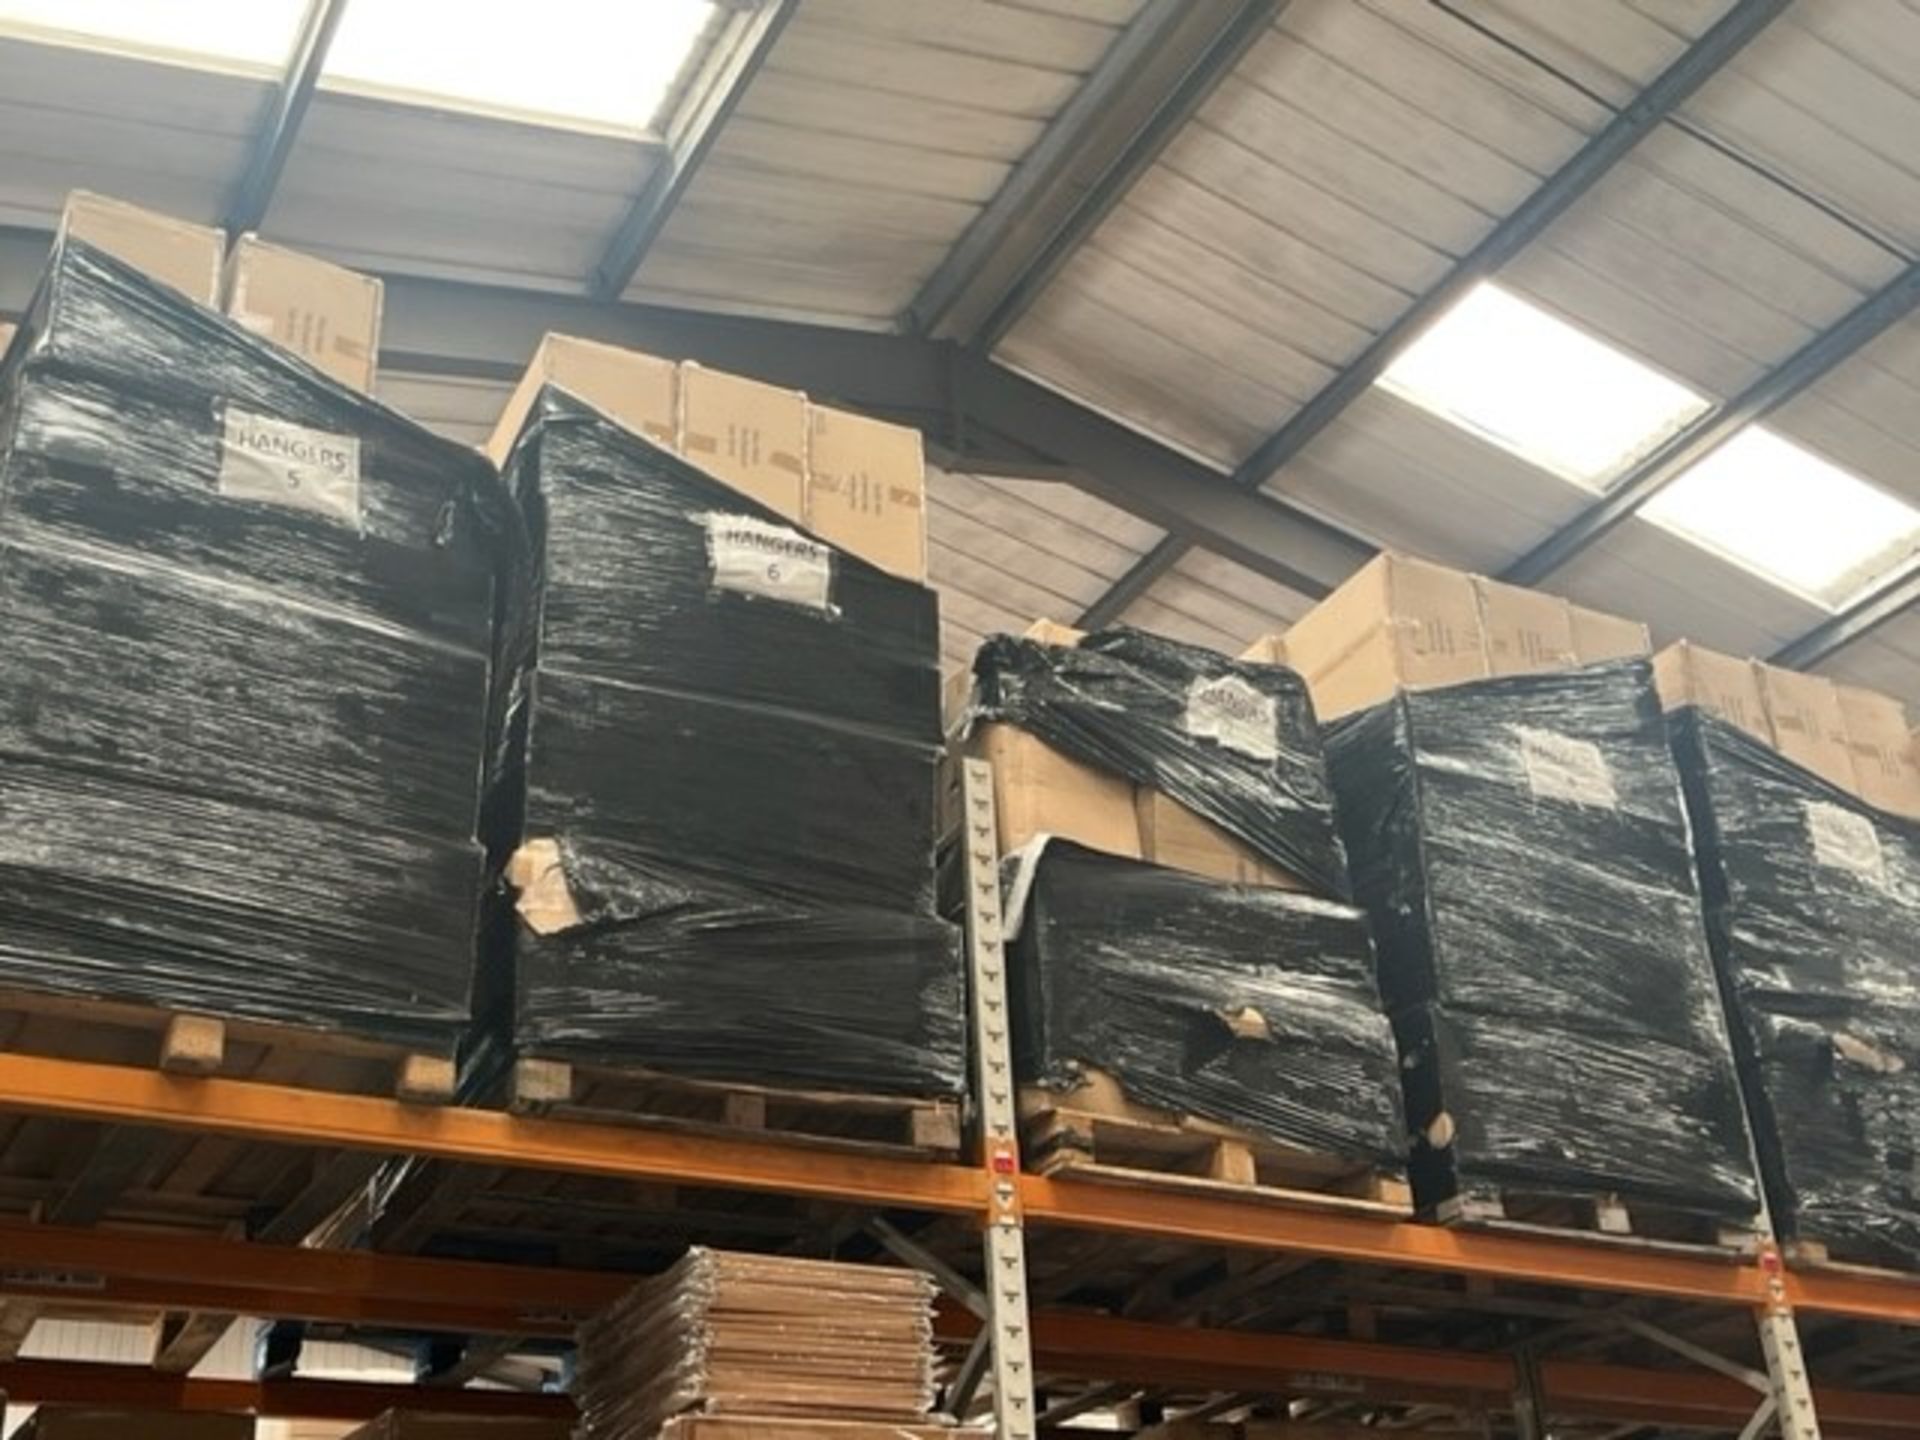 1 PALLET OF 1700 X WOODEN SECURITY COATHANGERS DARK WOOD WITH NON-SLIP TROUSER BAR. - Image 4 of 4